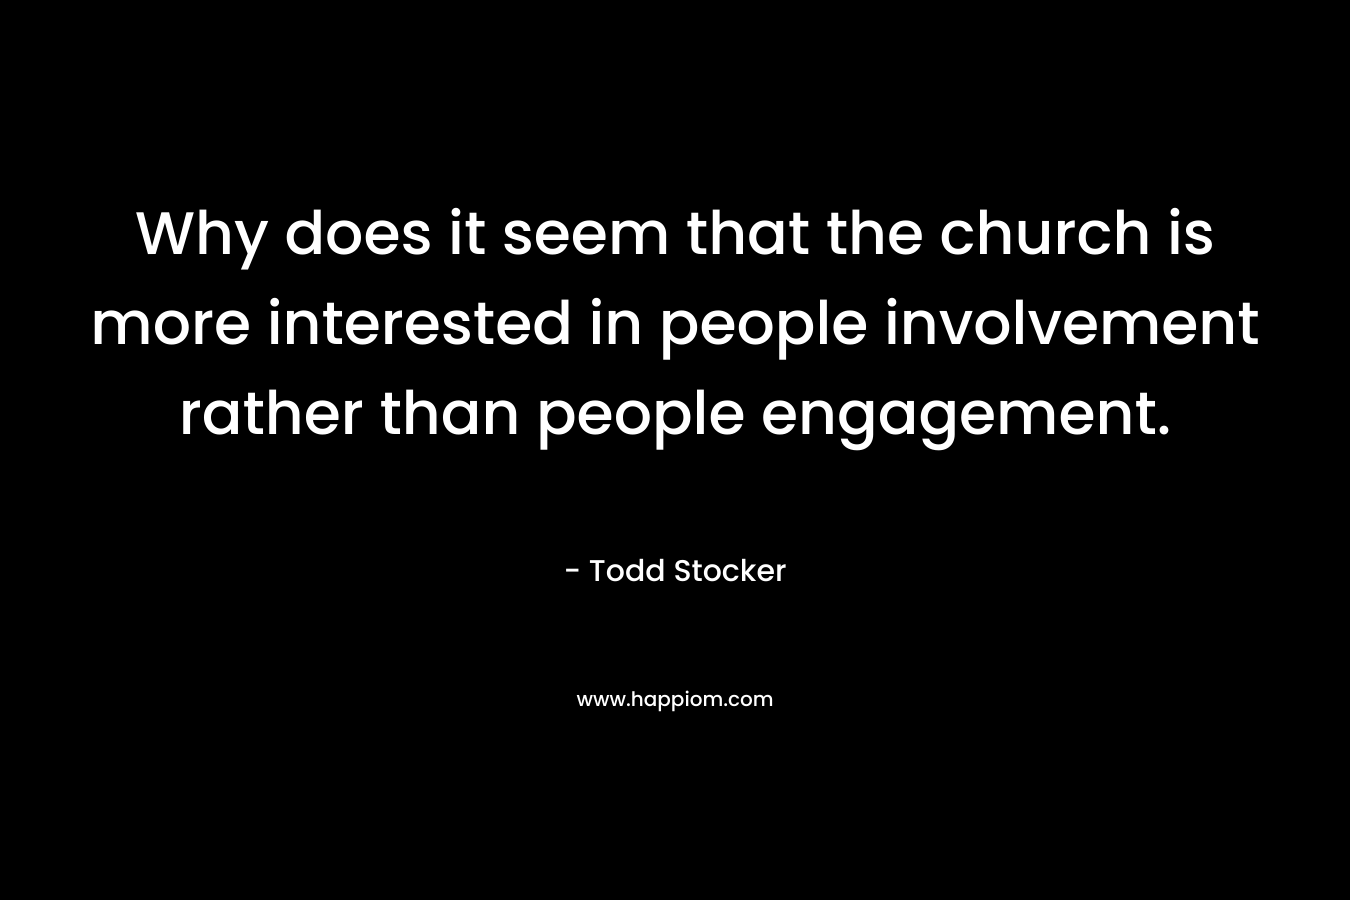 Why does it seem that the church is more interested in people involvement rather than people engagement.